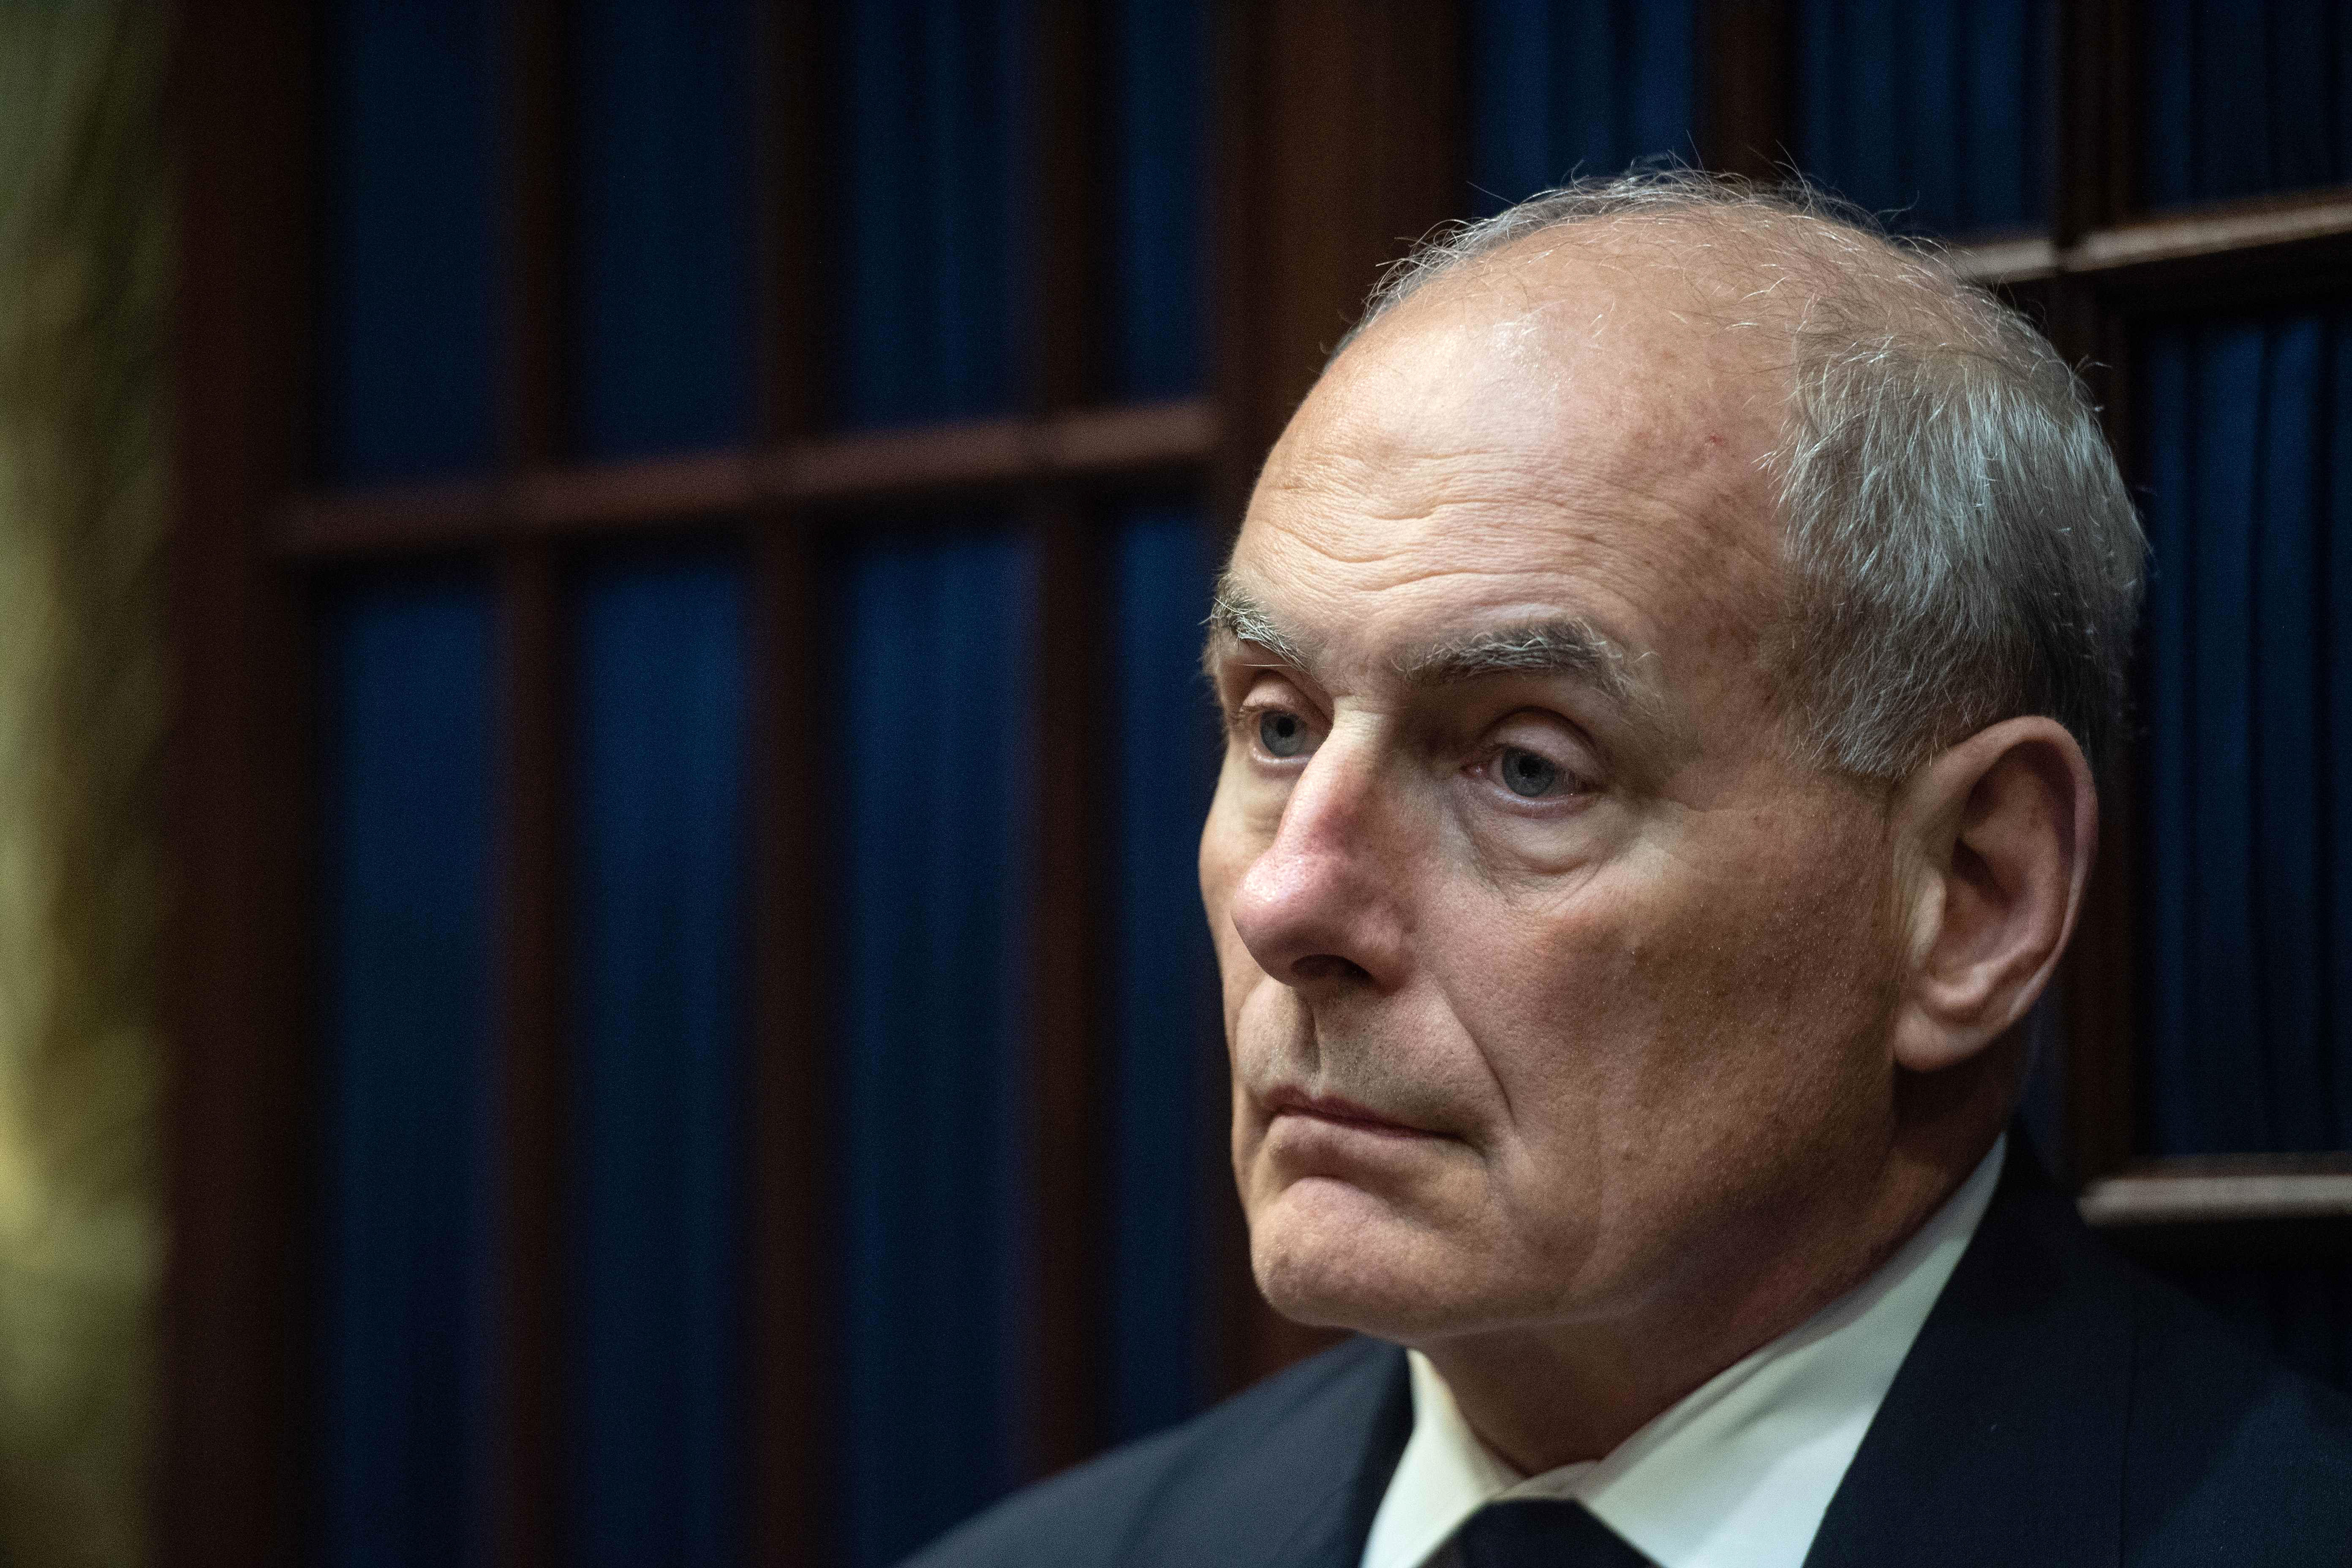 Then-White House chief of staff John Kelly attends a meeting at the White House on September 5, 2018.